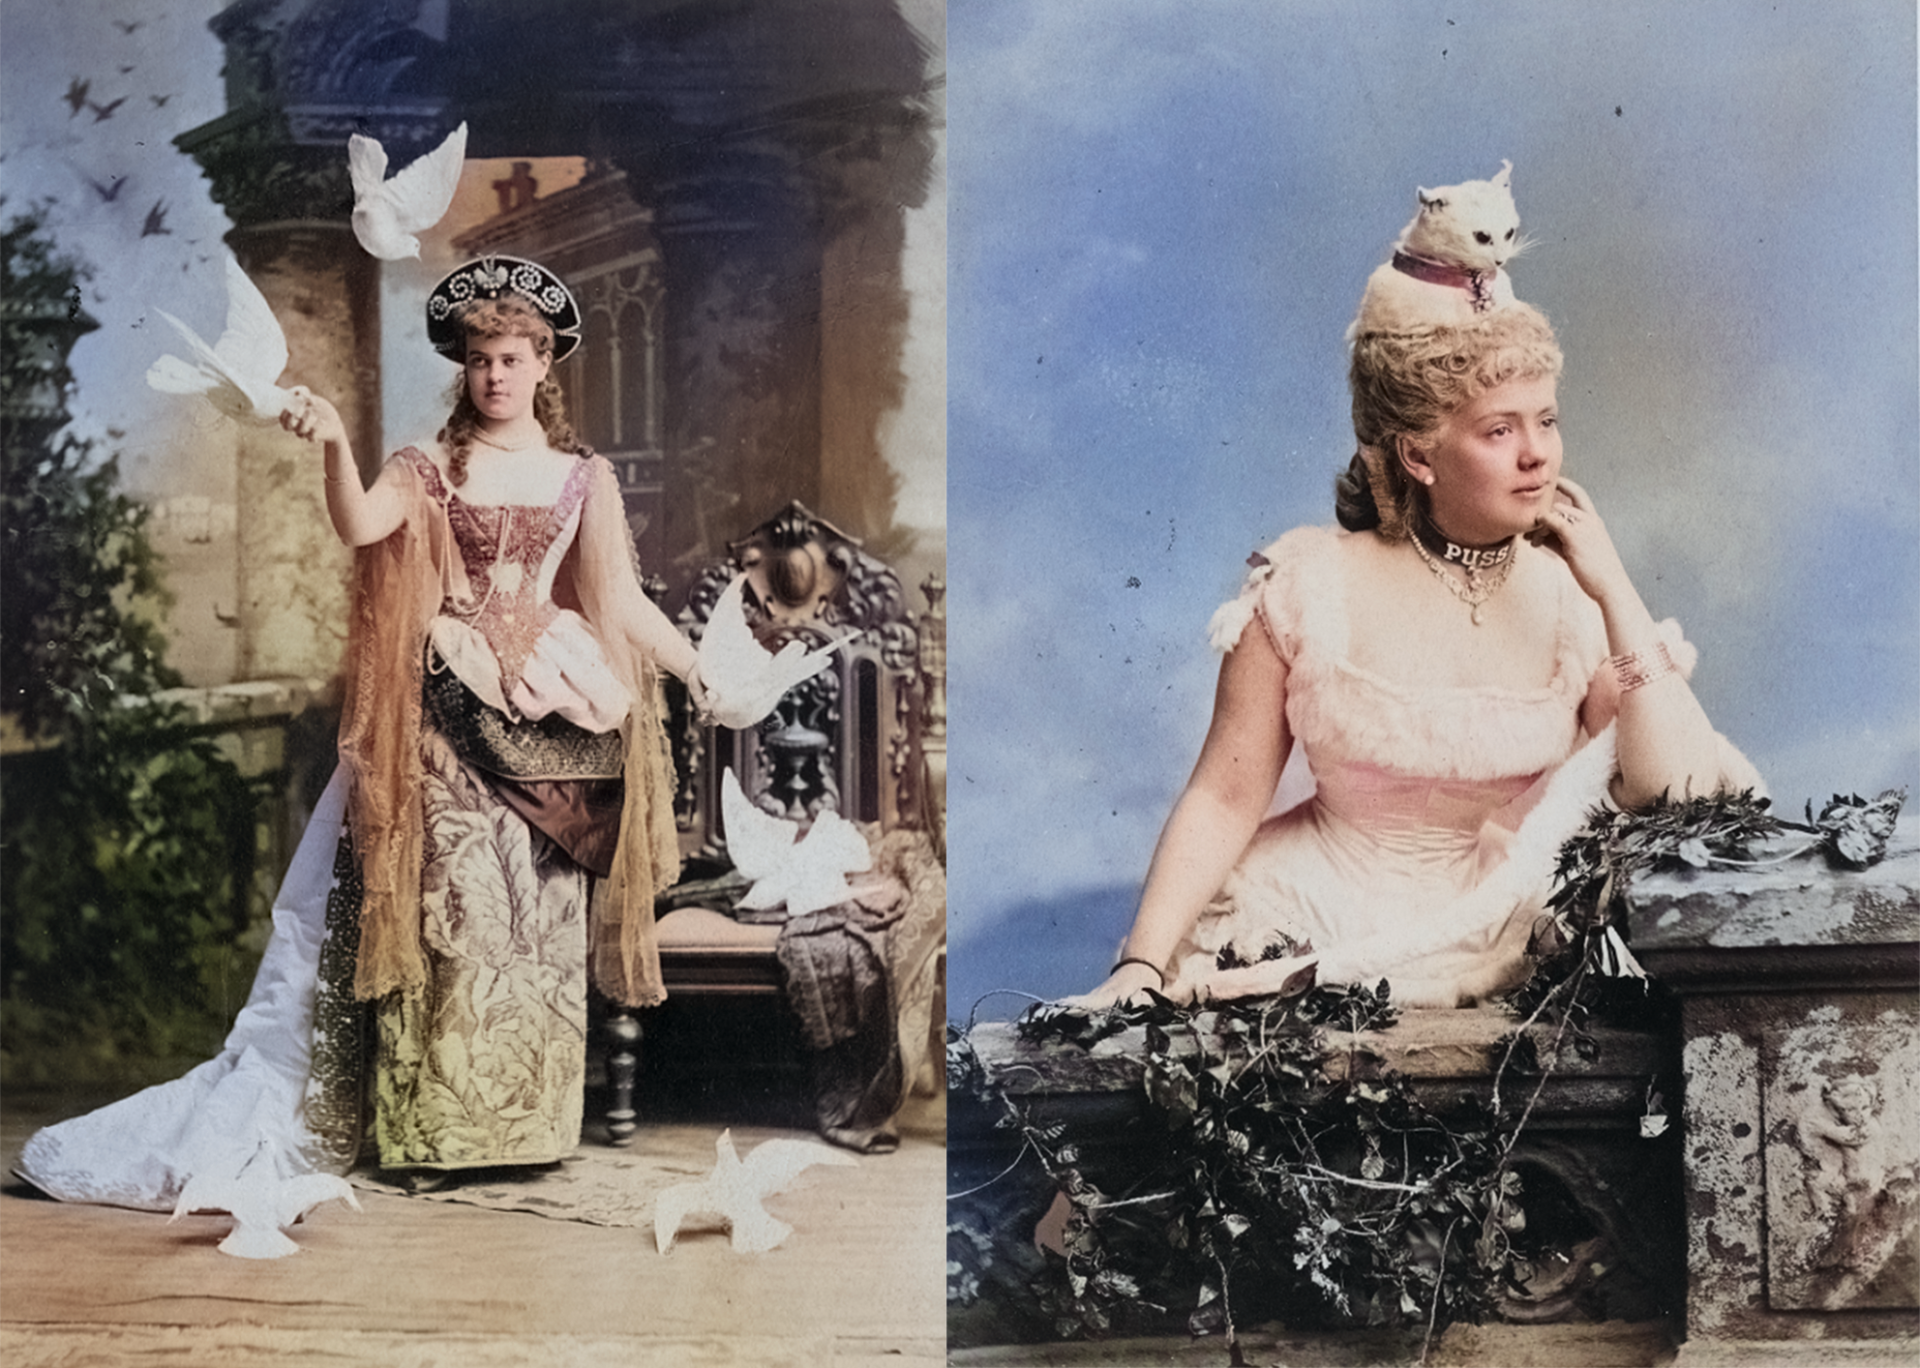 This collage features two images, one of a woman in a fancy dress with doves all around her and the other of a woman with a cat on her head.